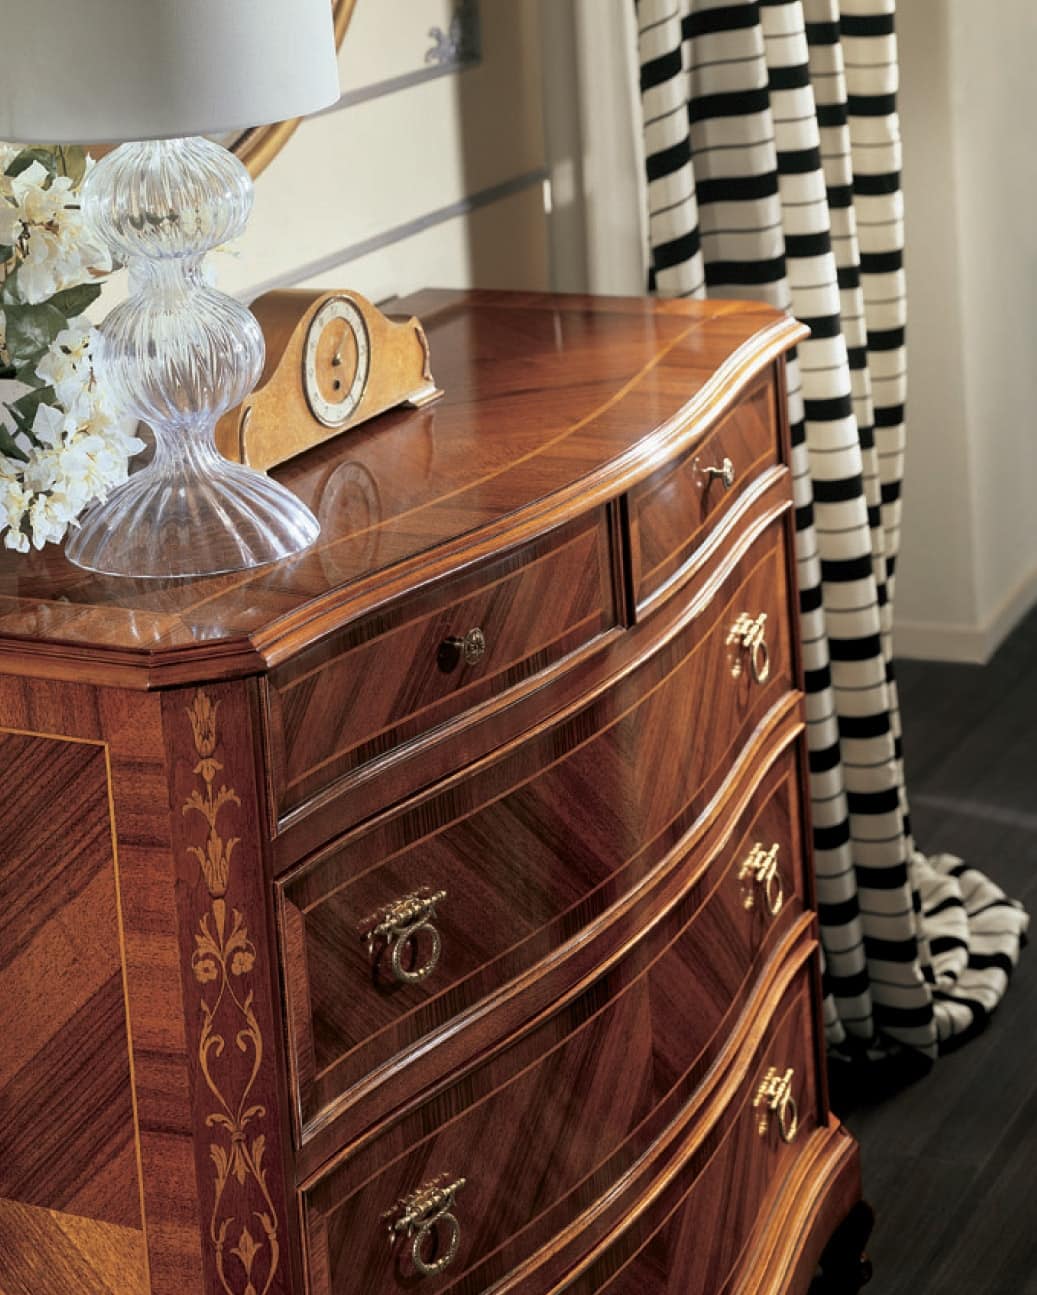 Settecento chest of drawers, Chest of drawers in style '700, with inlaid herringbone